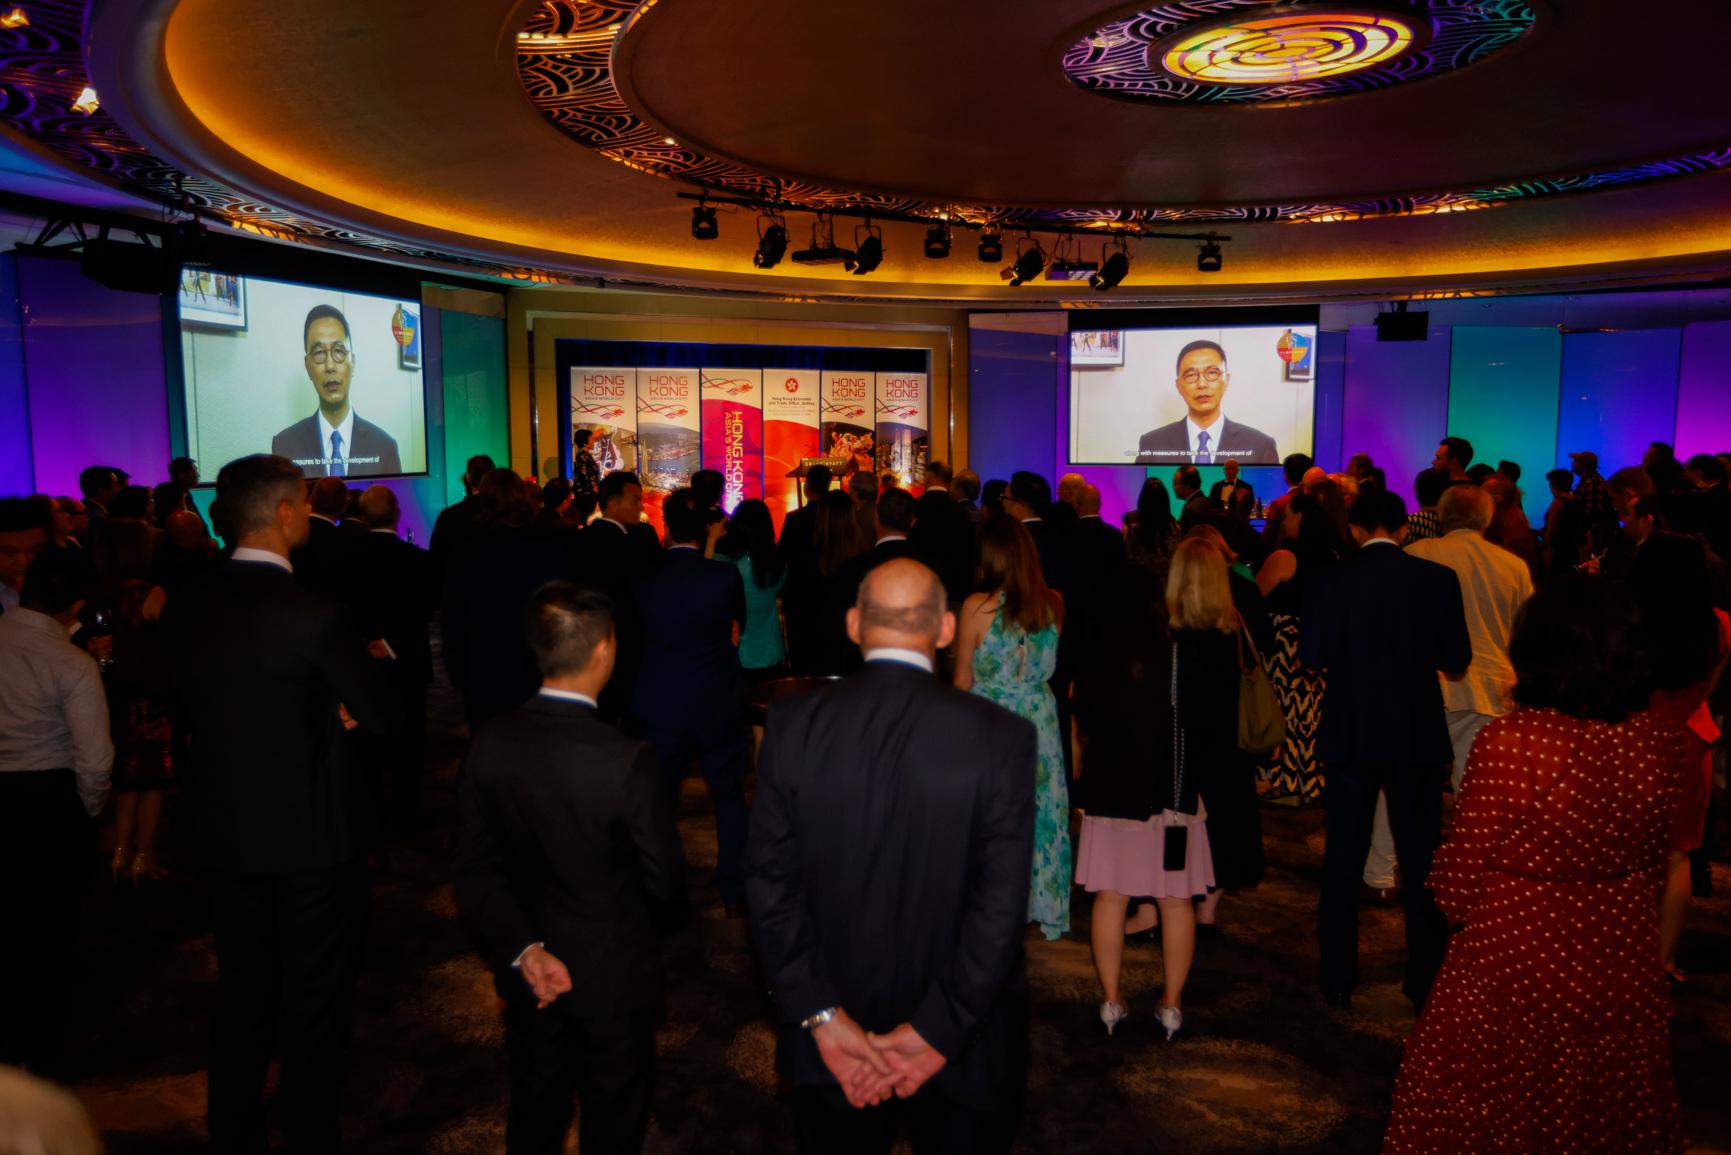 The Hong Kong Economic and Trade Office, Sydney hosted a reception in Melbourne, Australia, today (February 15) to celebrate the Year of the Rabbit. Photo shows the Secretary for Culture, Sports and Tourism, Mr Kevin Yeung, delivering a virtual speech to highlight the latest arts and culture developments in Hong Kong.